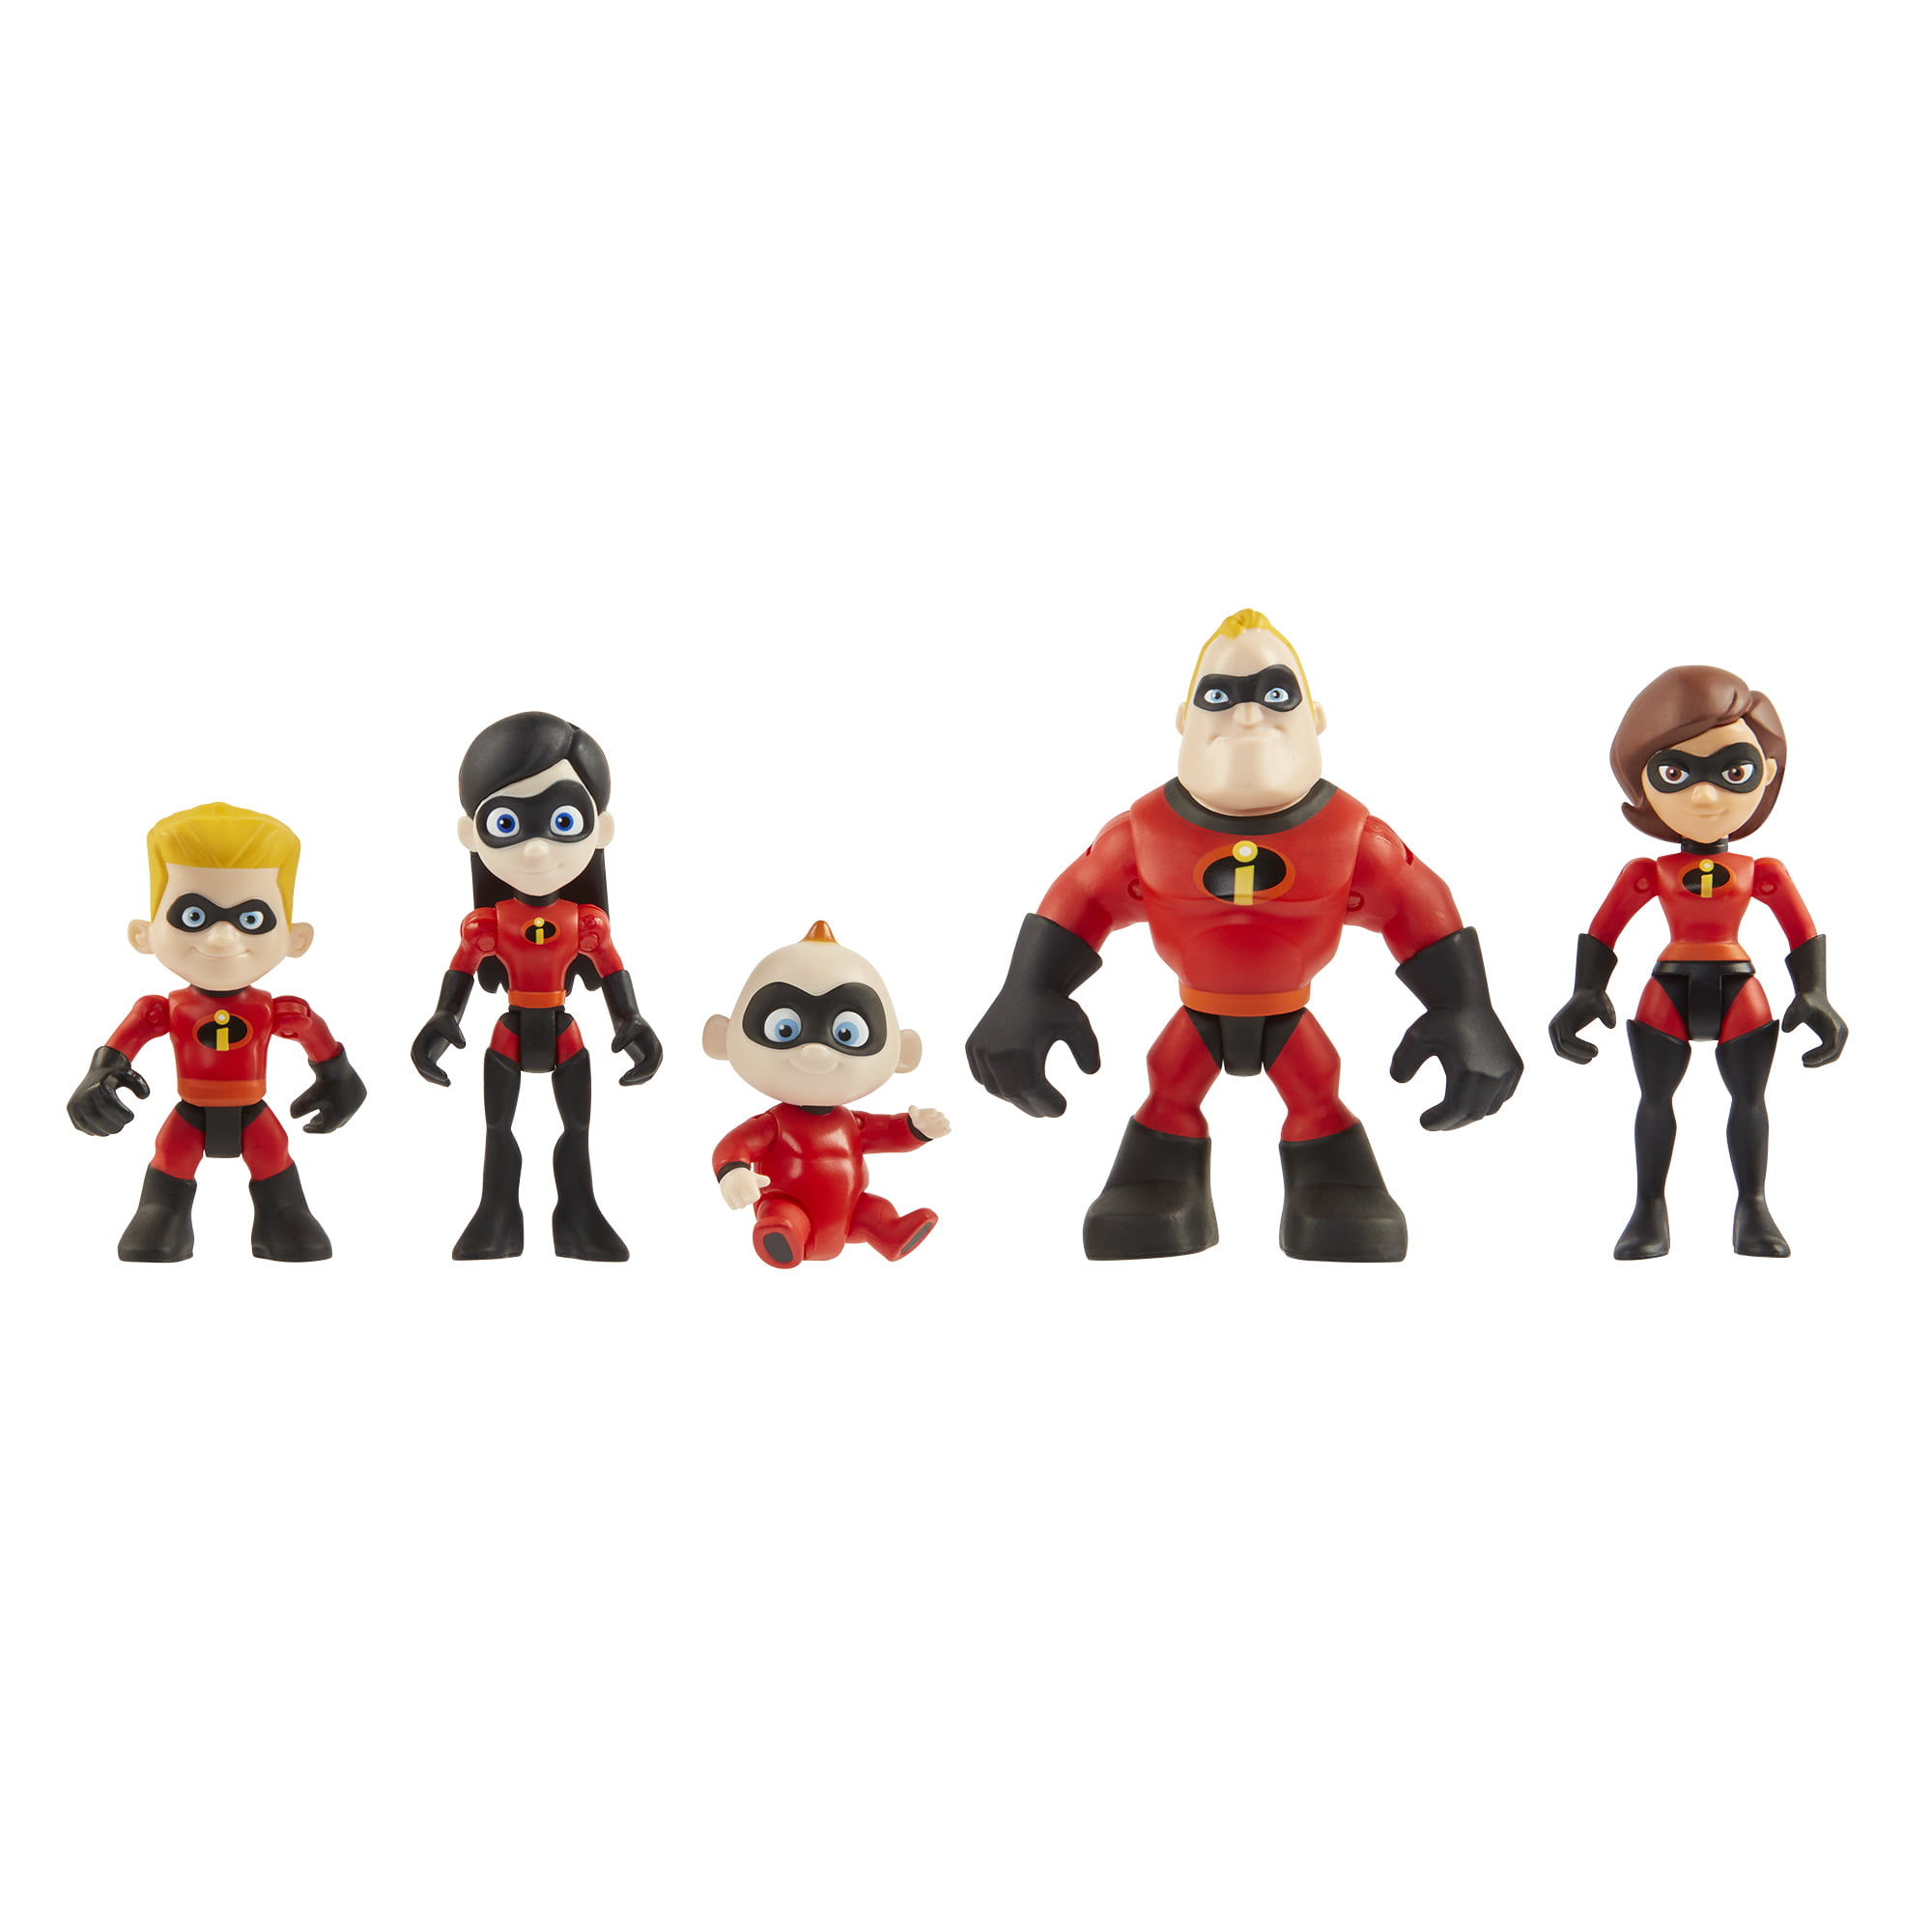 incredibles 2 family figure pack